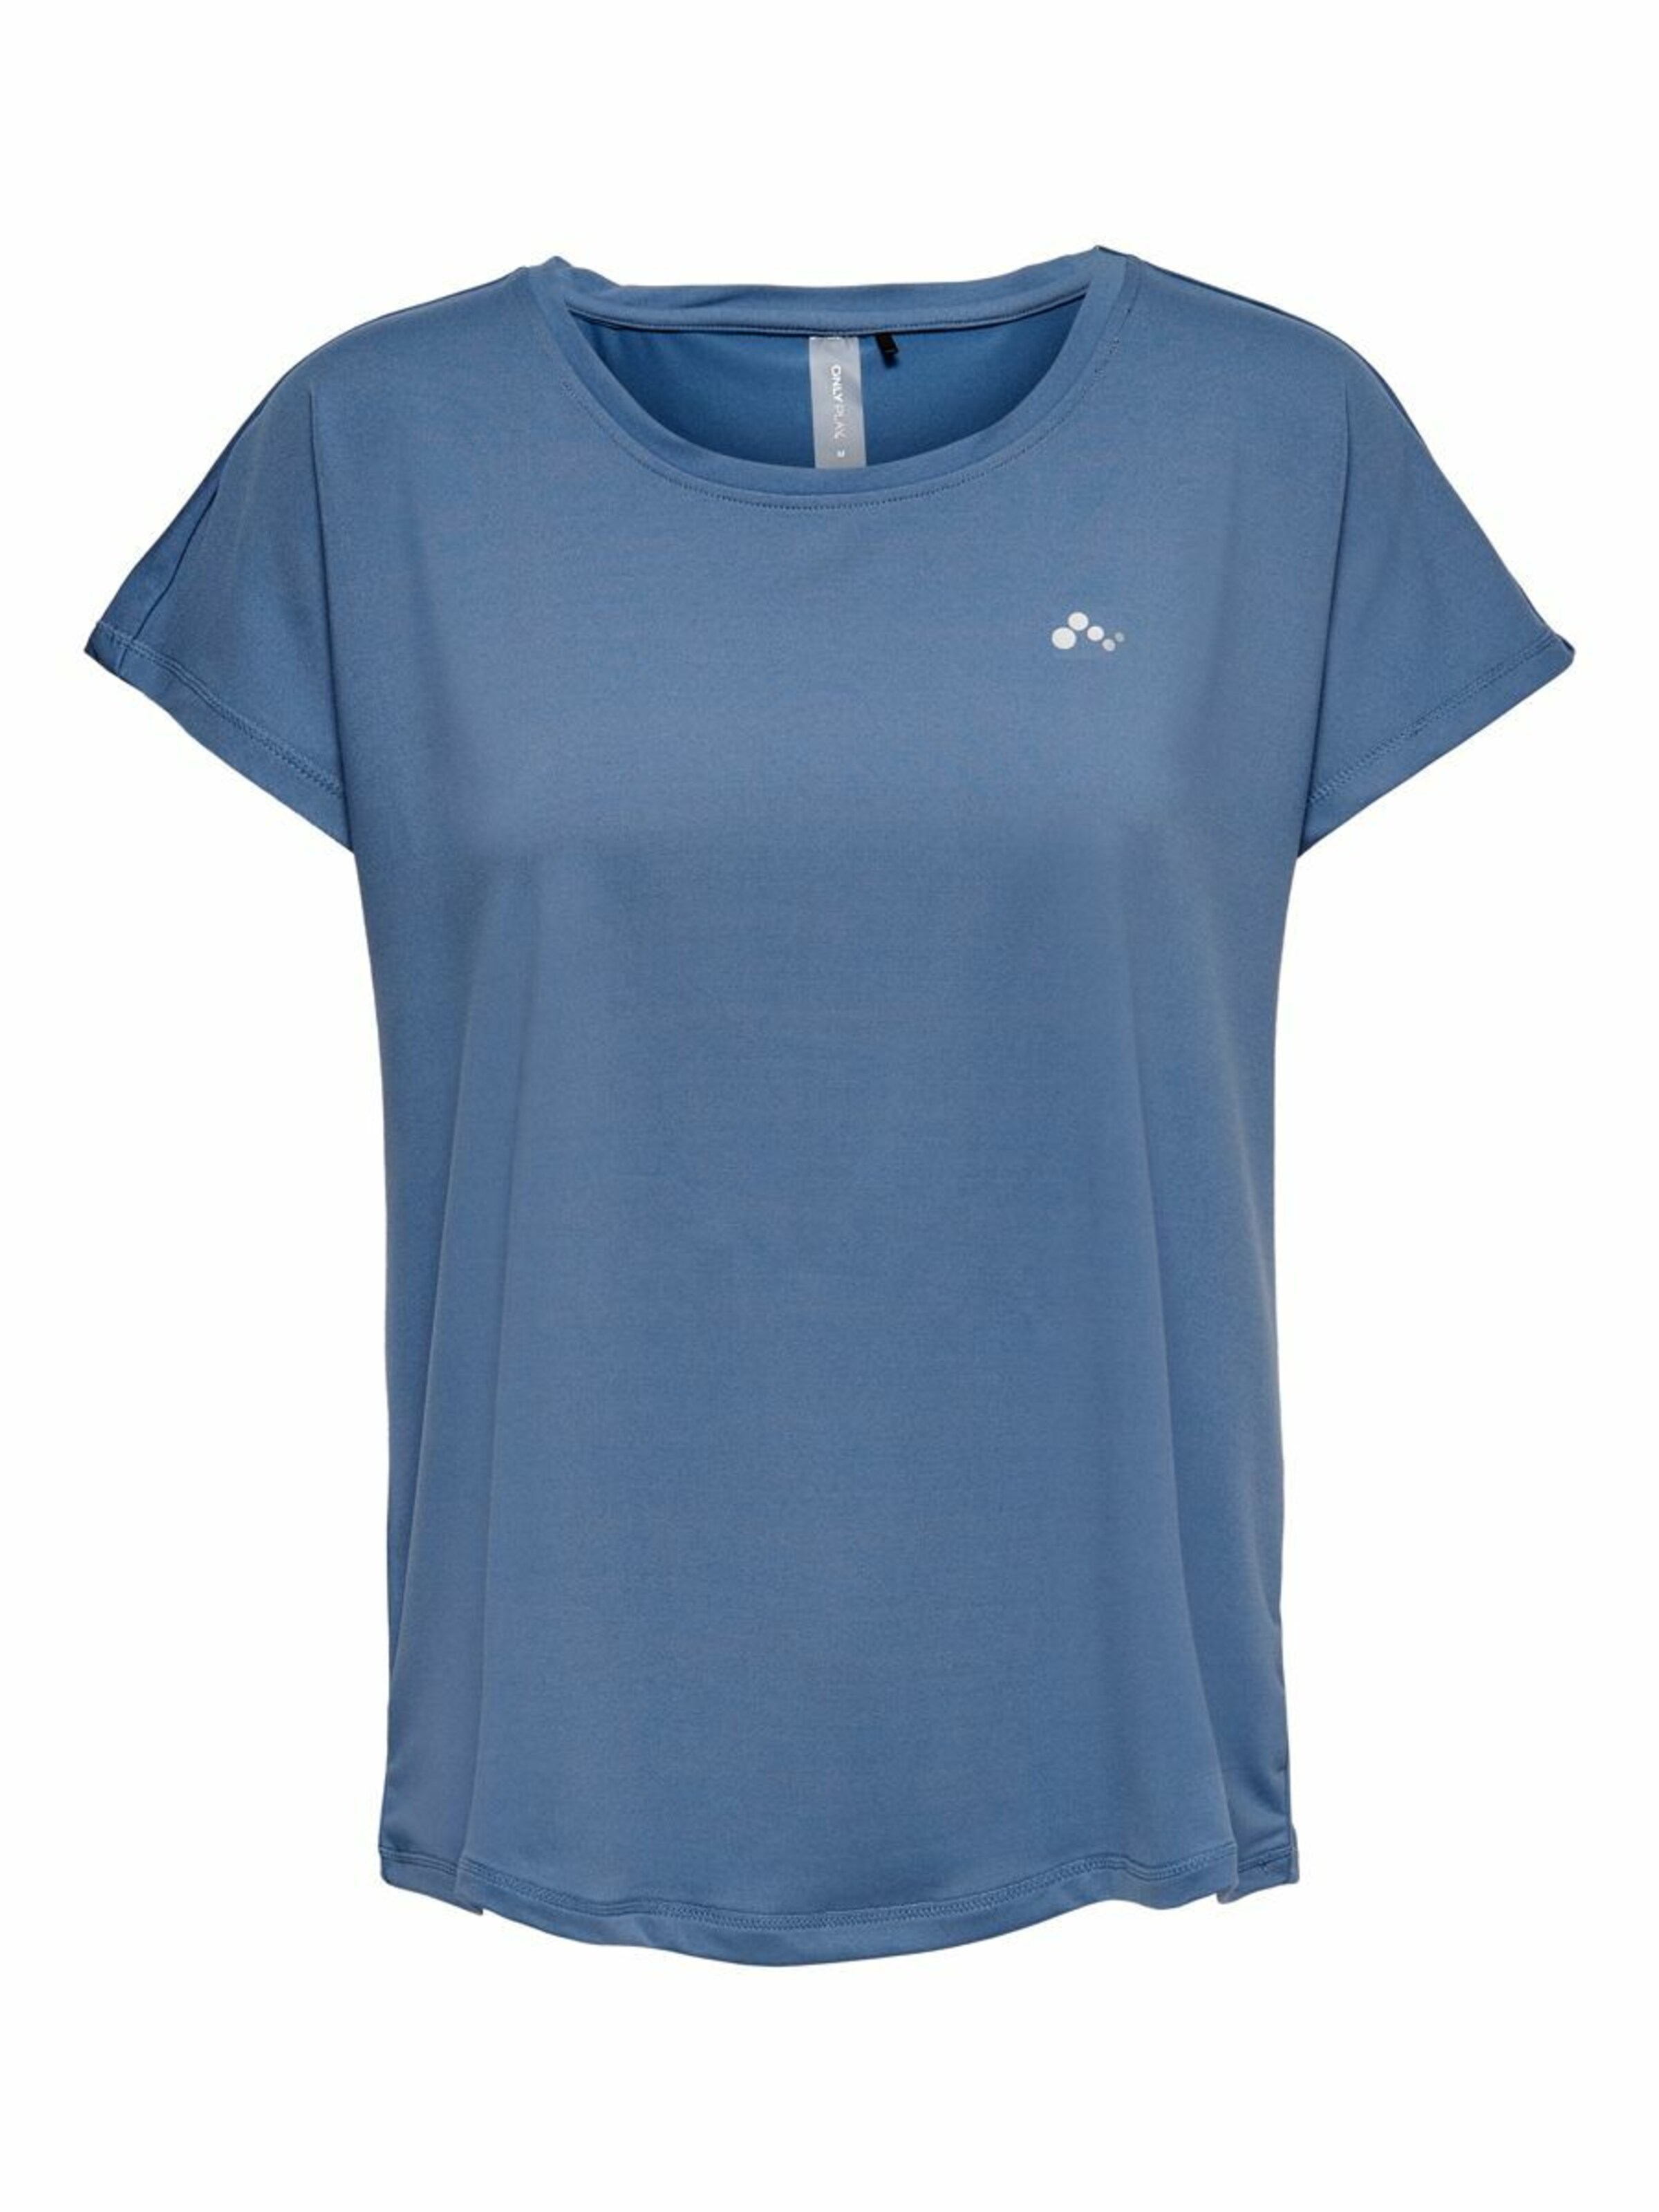 Sport Donna ONLY PLAY Top sportivo AUBREE in Blu Colomba 